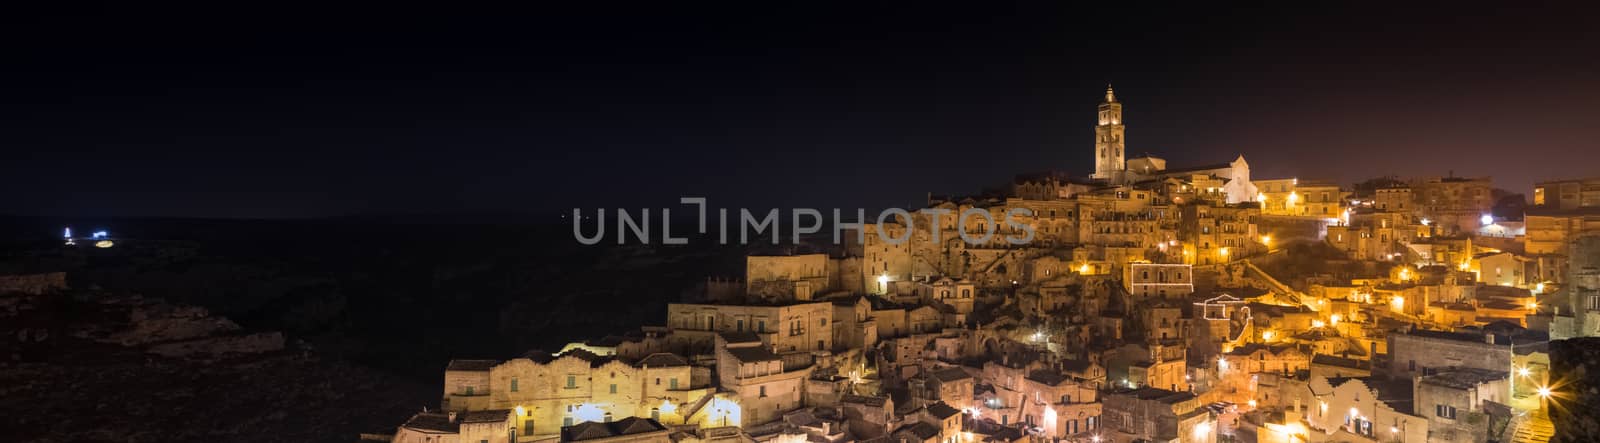 panoramic view of typical stones (Sassi di Matera) and church of Matera UNESCO European Capital of Culture 2019  at night 